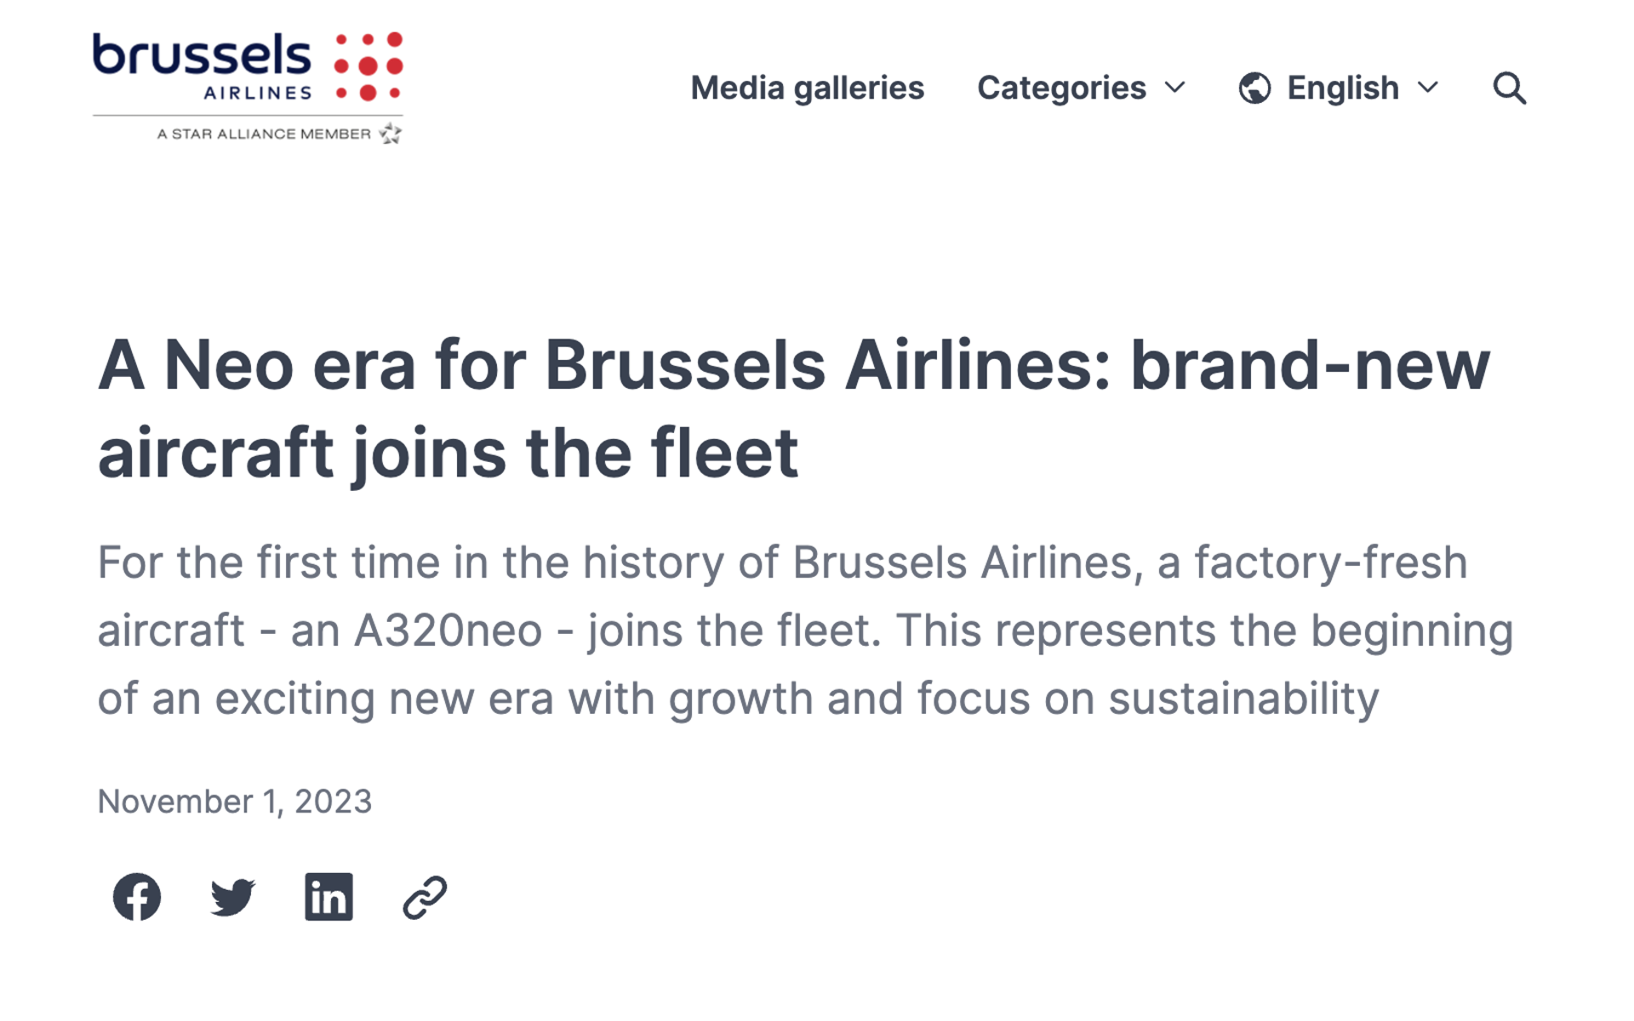 [TEST] Brand-new aircraft joins the Brussels Airlines fleet